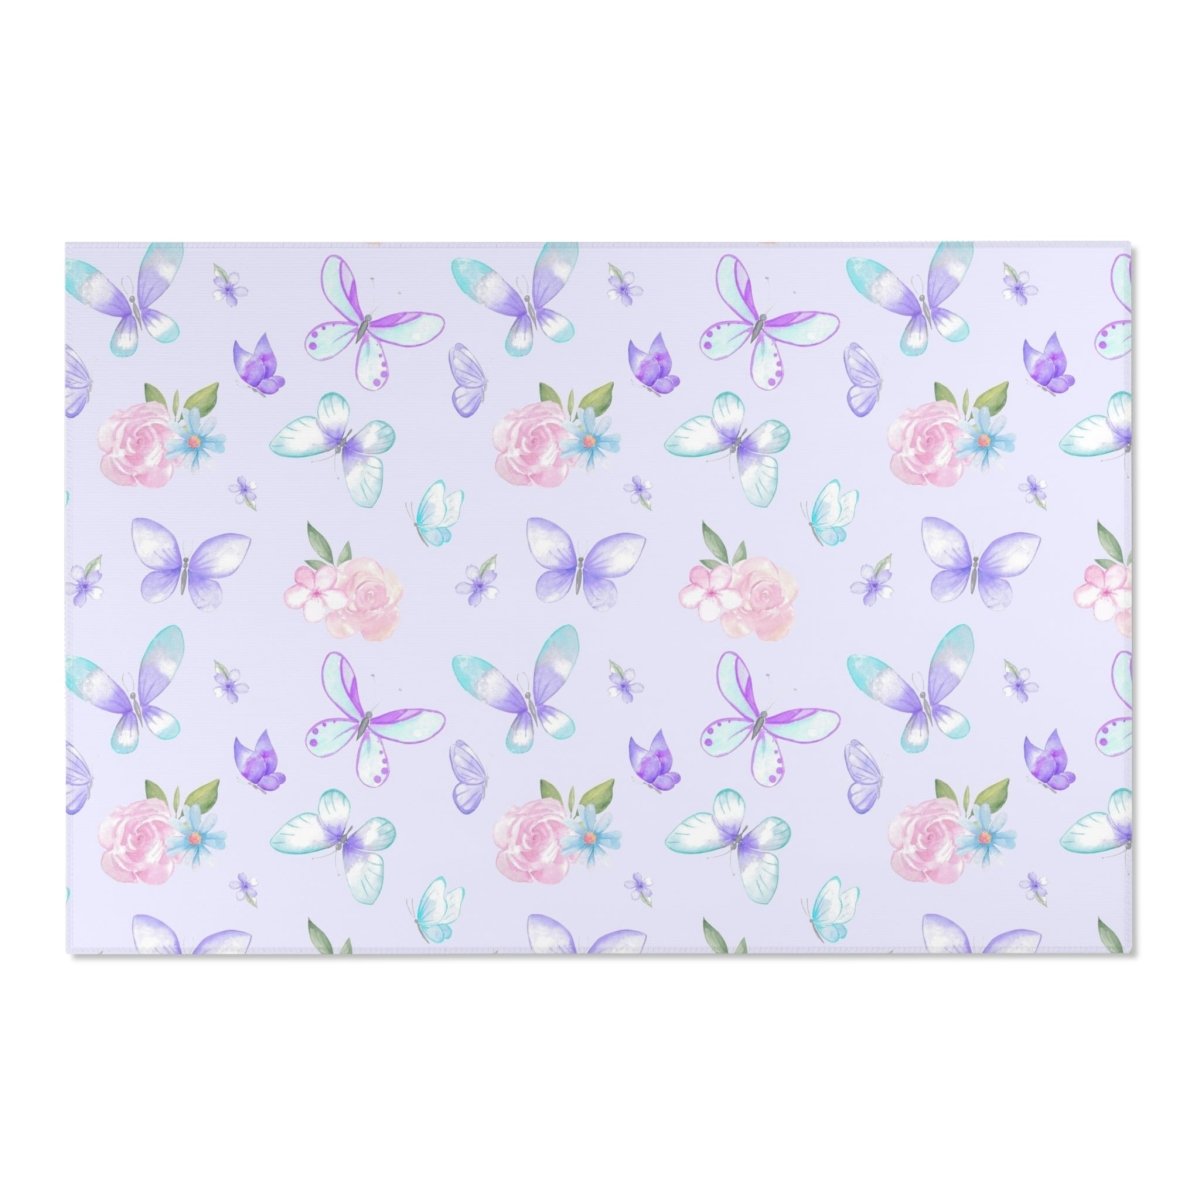 Butterfly Floral Nursery Rug - Butterfly Floral, gender_girl, Theme_Butterfly